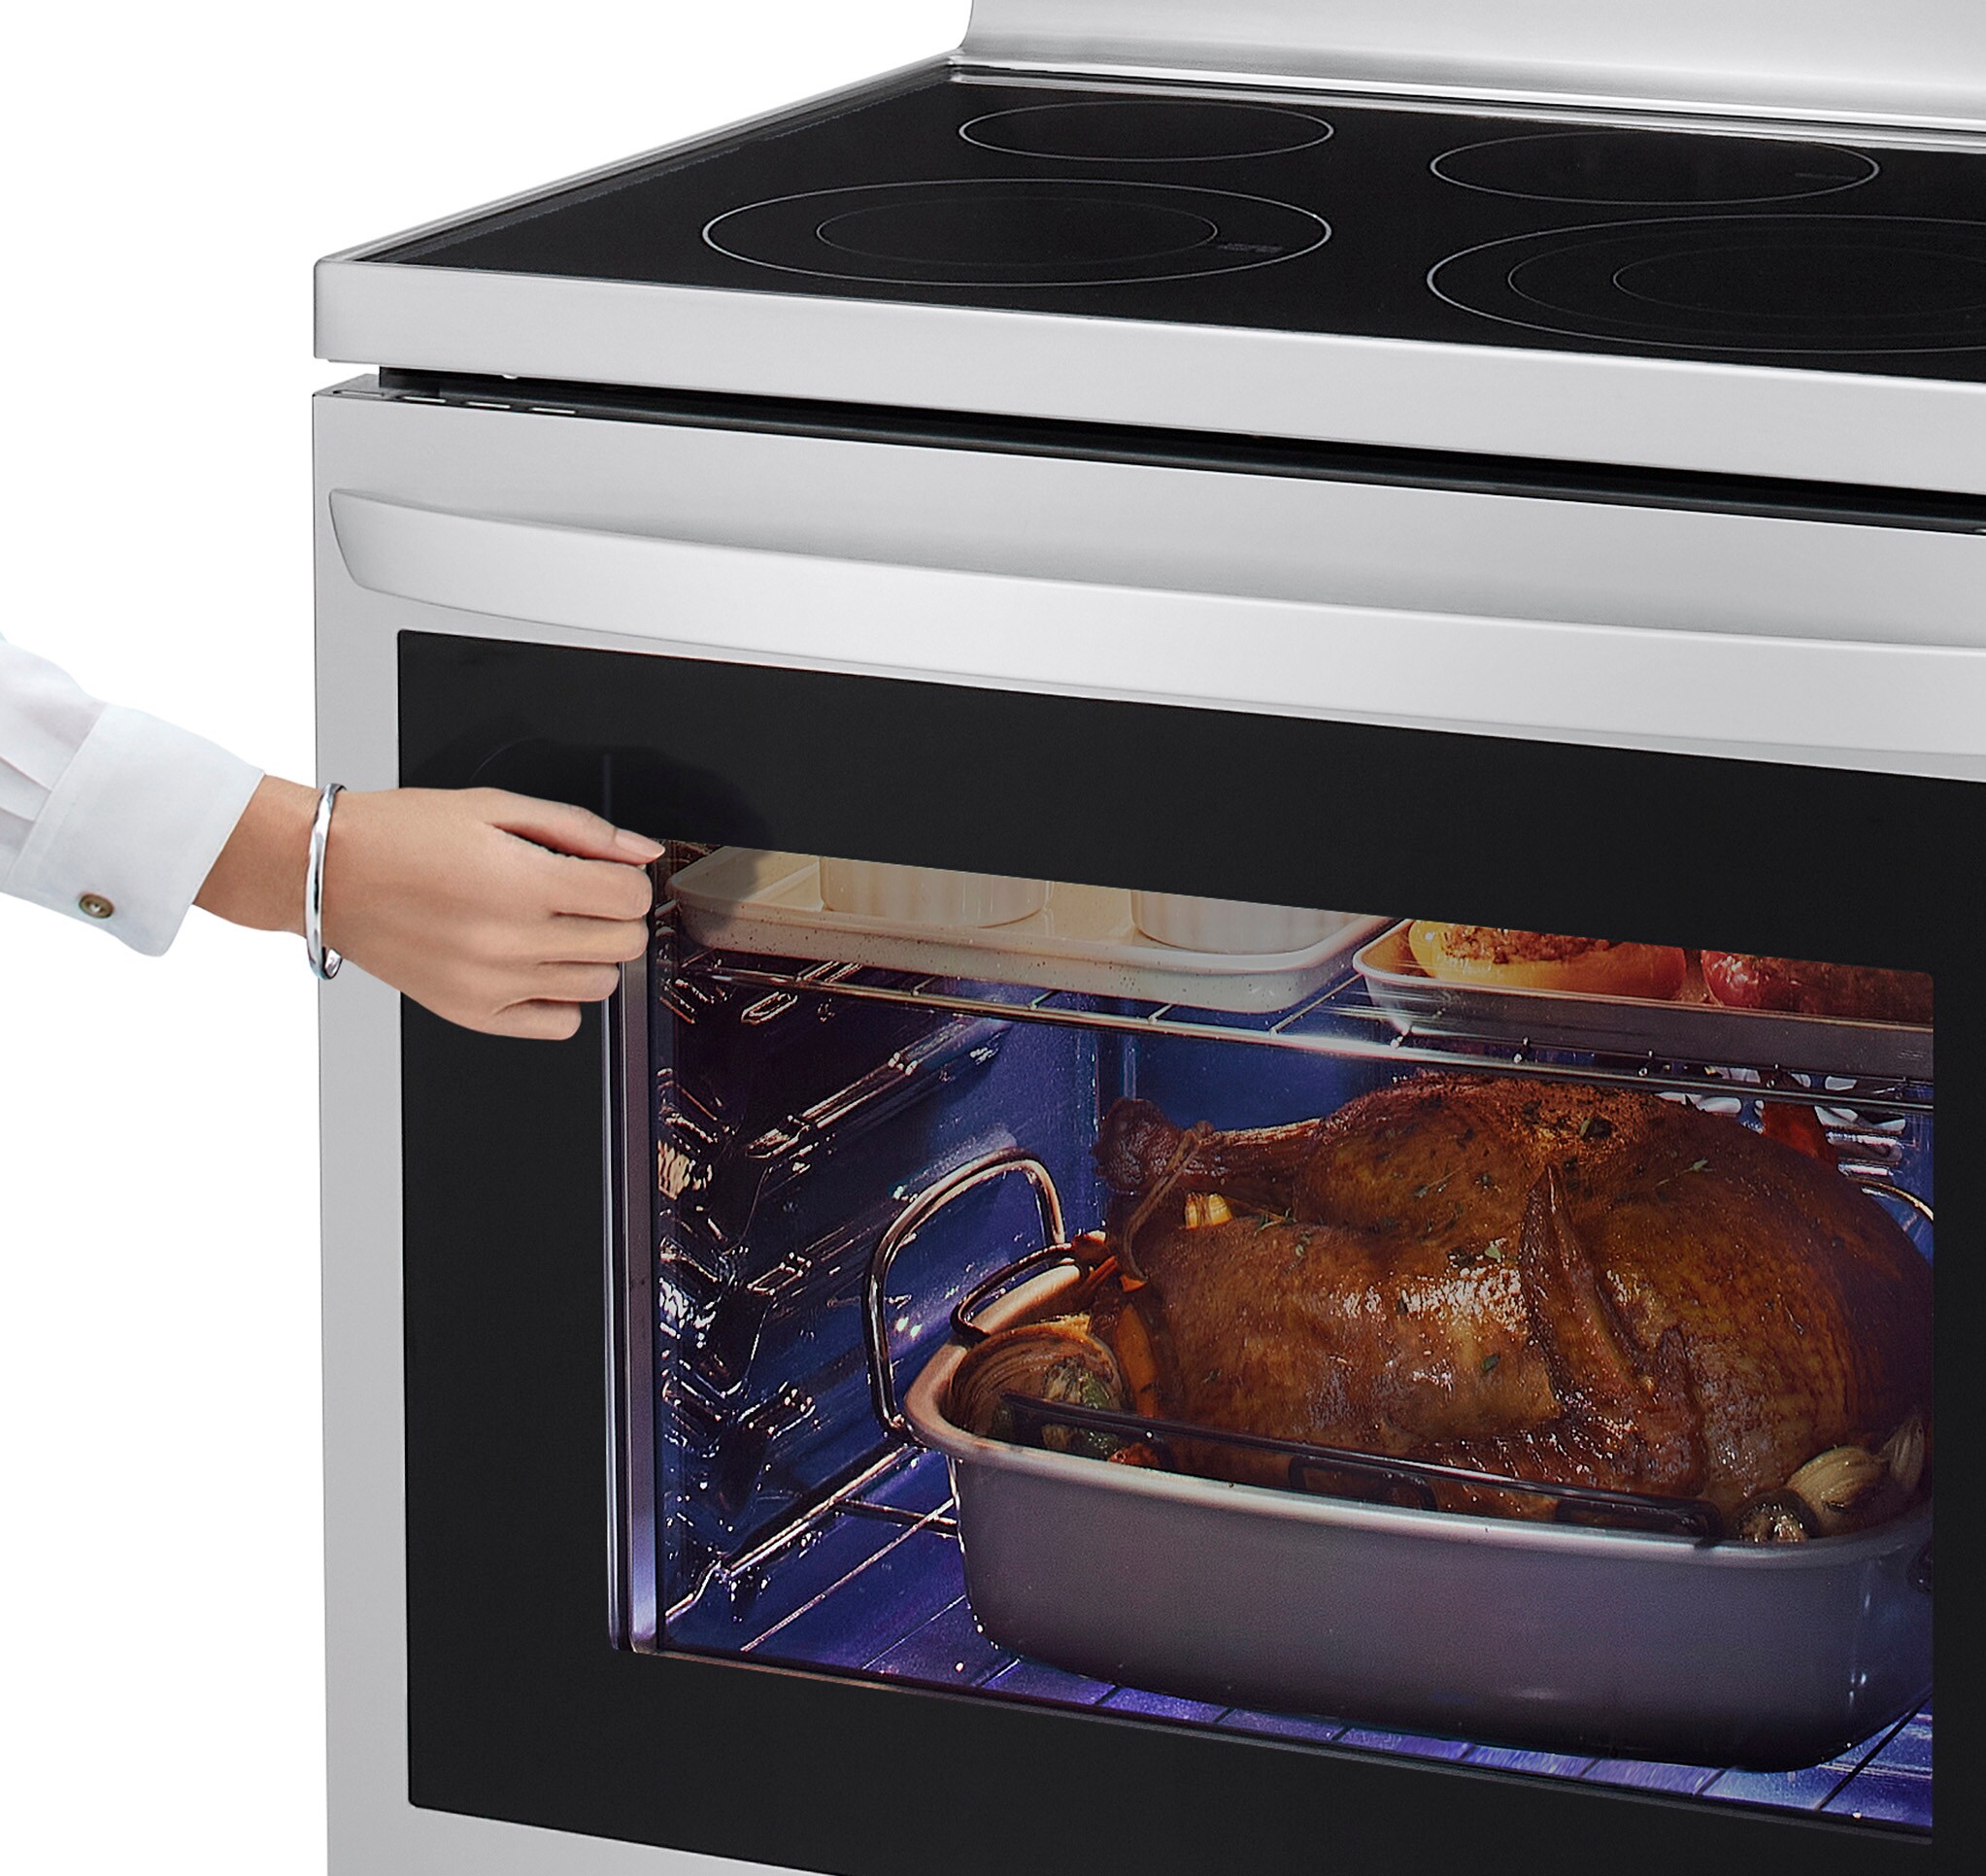 6.3 cu.ft. Air Fry InstaView ThinQ® Electric Range